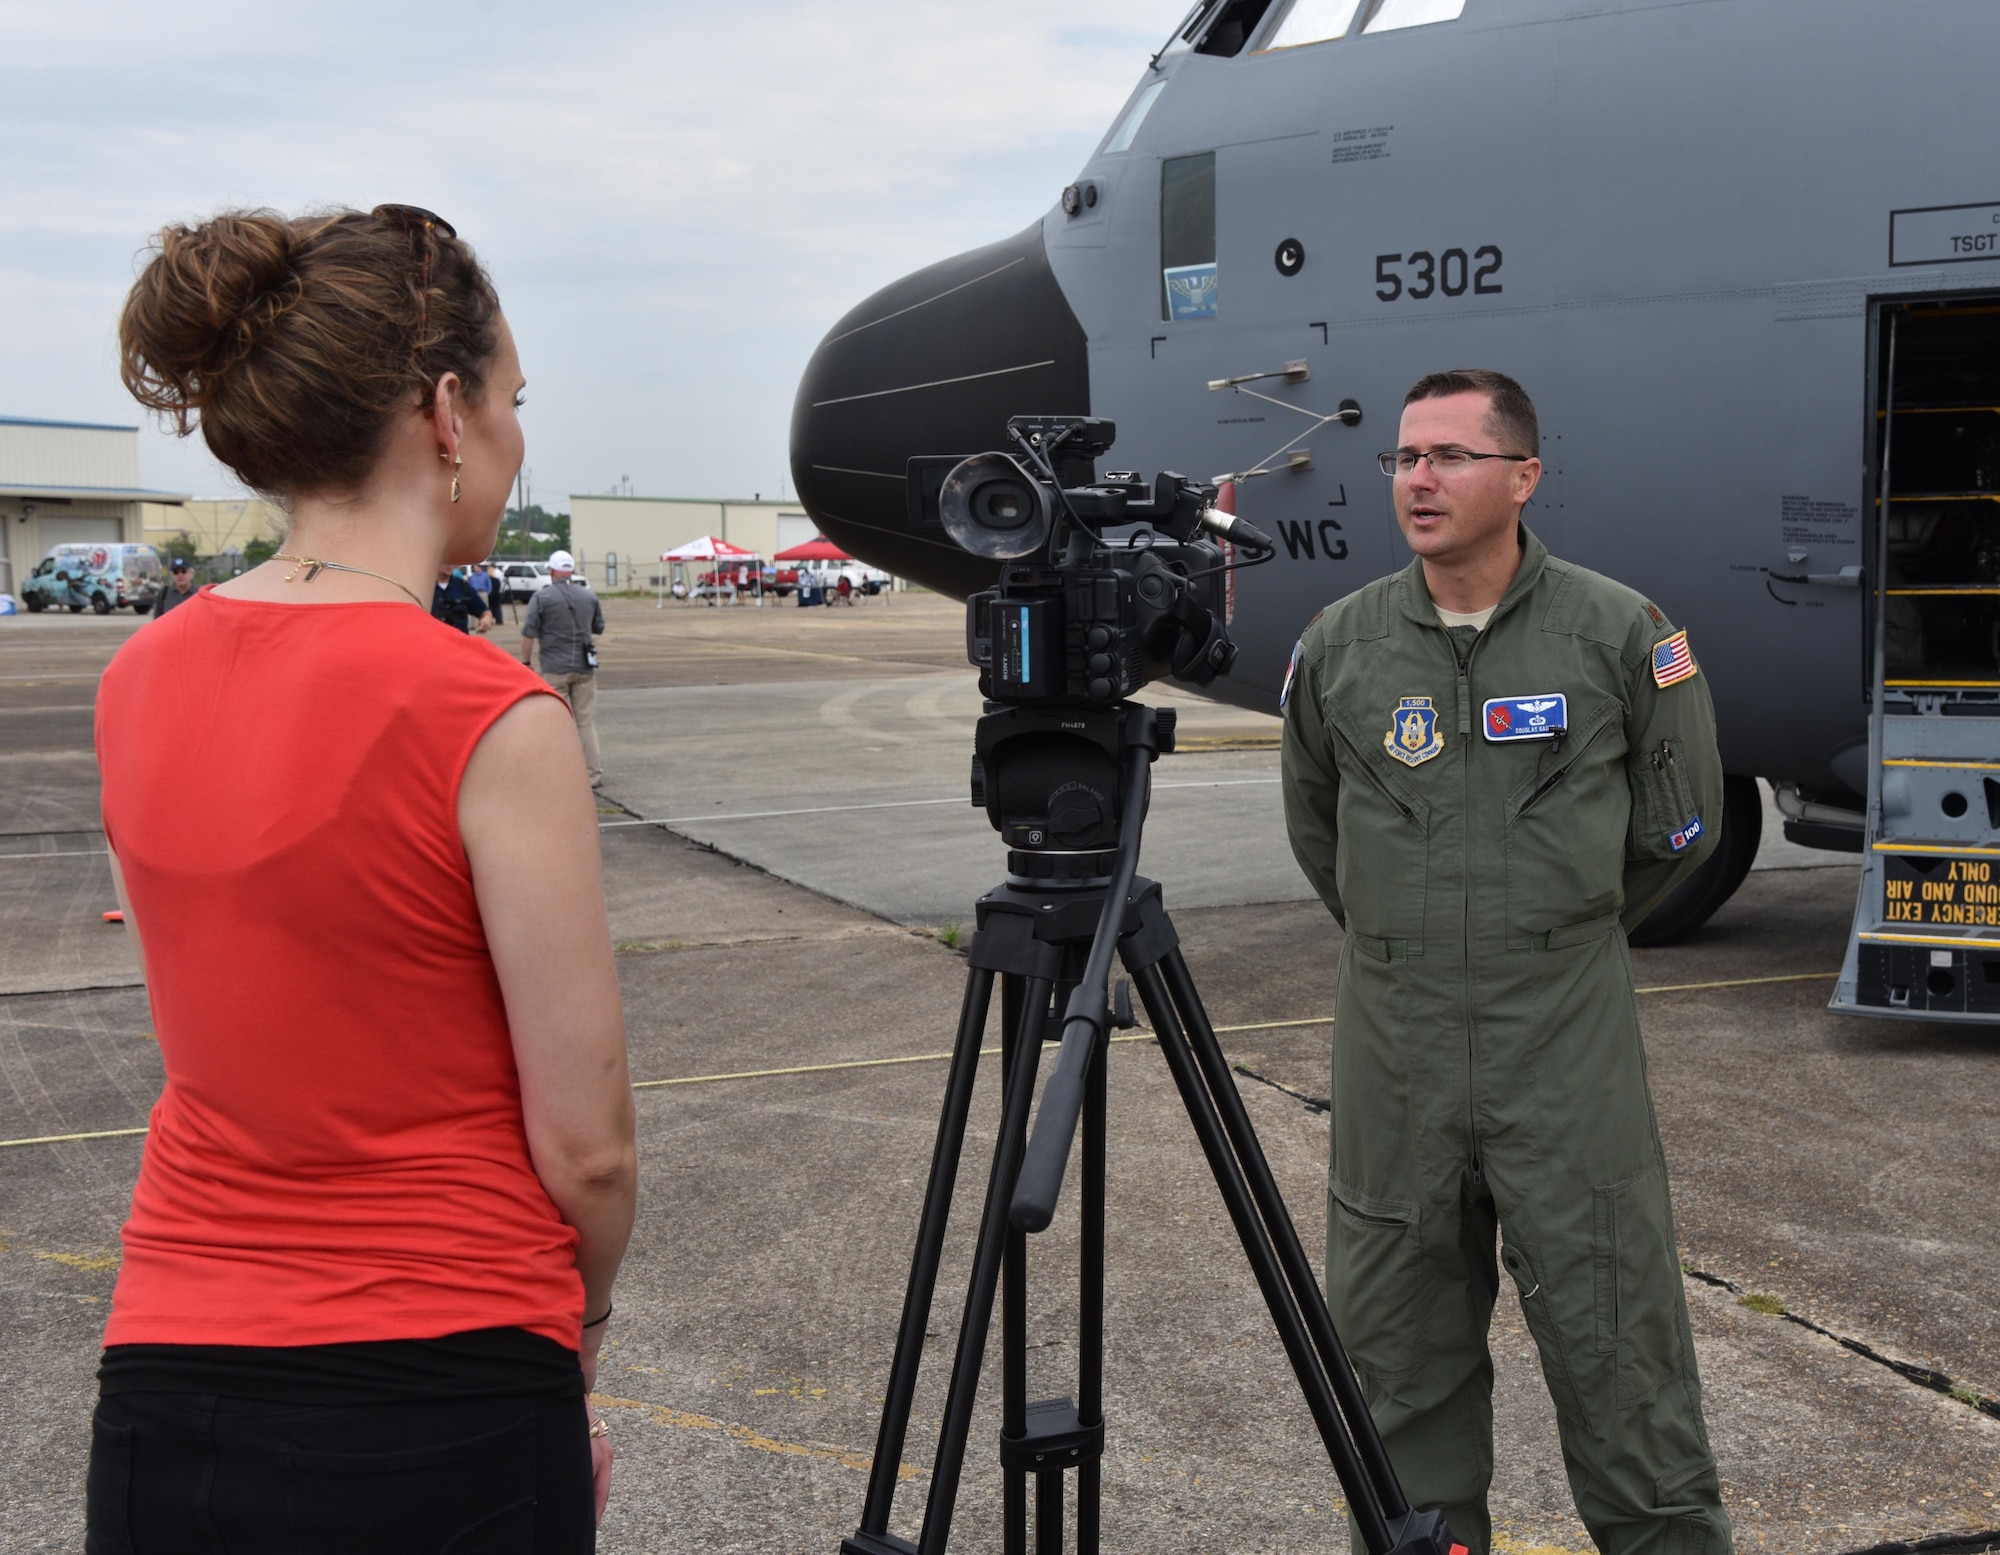 Maj. Douglas Gautrau, 53rd Weather Reconnaissance Squadron weather officer, is interviewed by Mobile, Alabama, media May 19, 2016, during the Gulf Coast Hurricane Awareness Tour. The HAT, which stopped in San Antonio and Galveston, Texas, New Orleans, Mobile, Alabama, and Naples, Florida, May 16-20, 2016, is a joint effort between NOAA's National Weather Service and National Hurricane Center and the 403rd Wing's 53rd WRS to promote awareness about the destructive forces of hurricanes and how people can prepare. (U.S. Air Force photo/Maj. Marnee A.C. Losurdo)